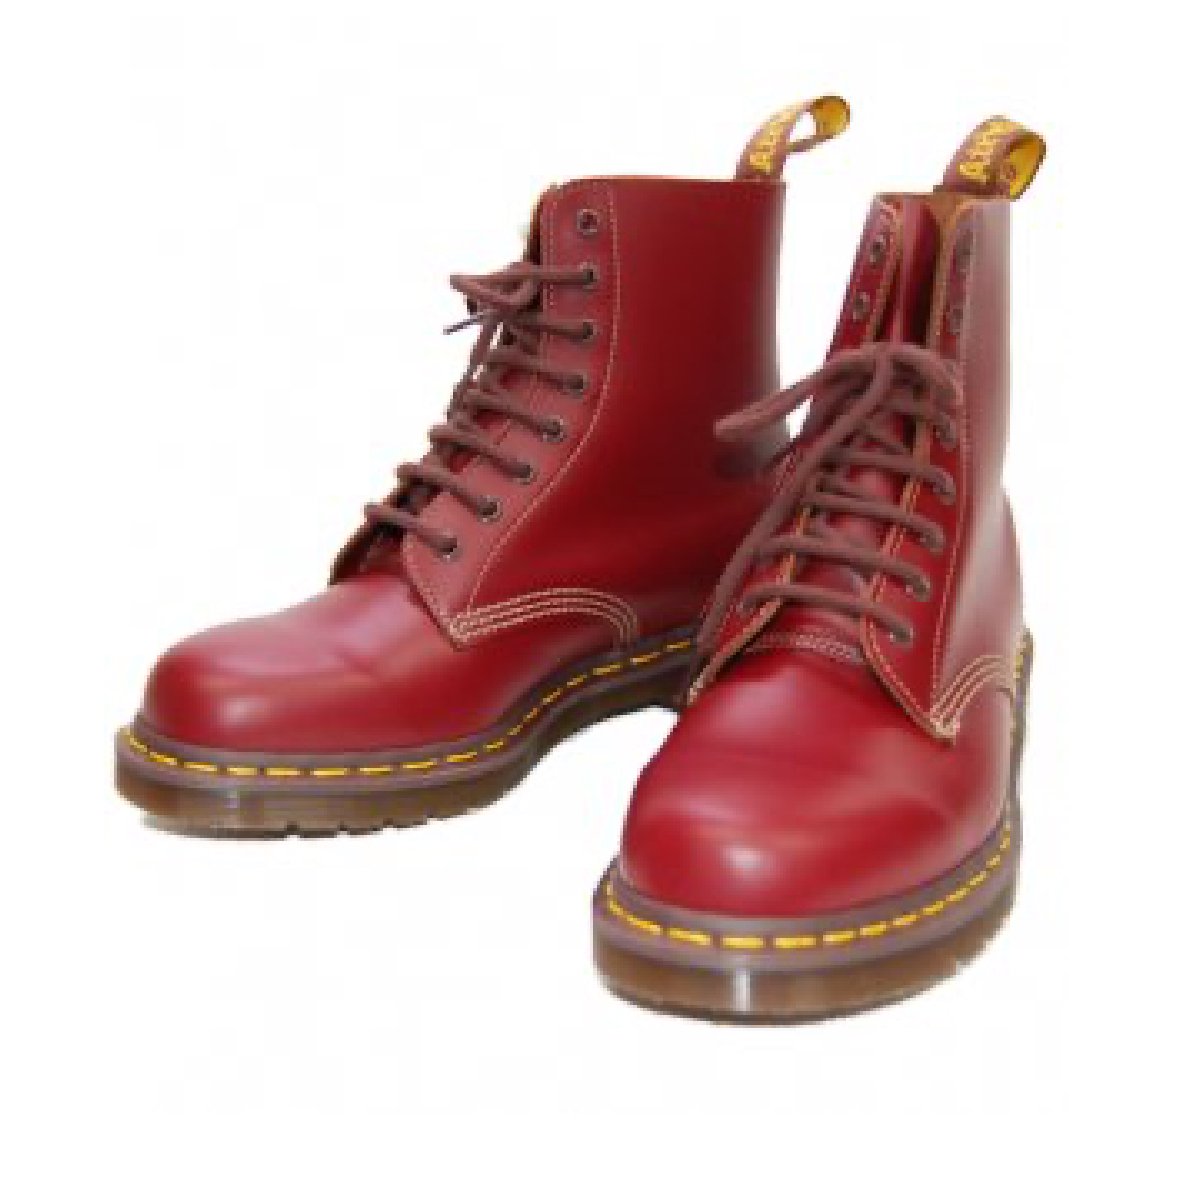 Dr.Martens】【MADE IN ENGLAND】1460 8-EYE ブーツ：OX BLOOD